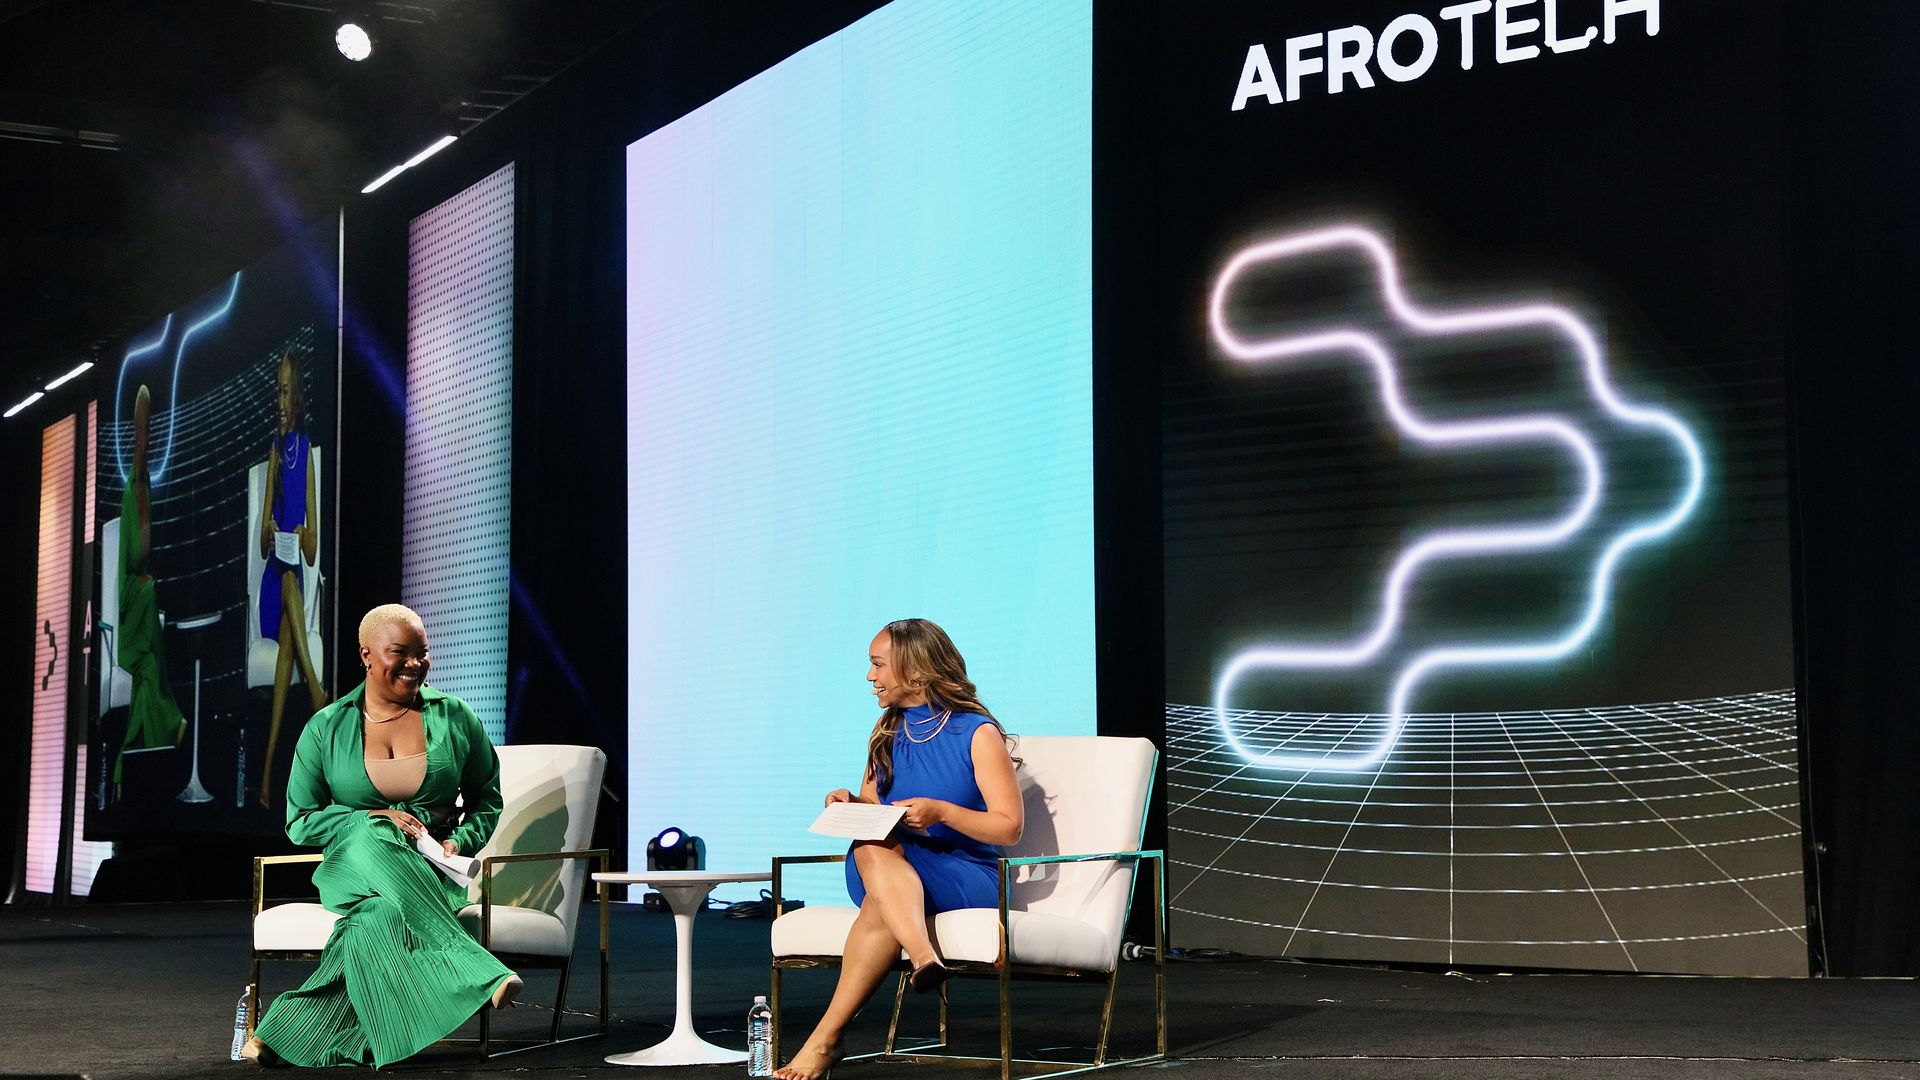 People participating in a session of the AfroTech conference.